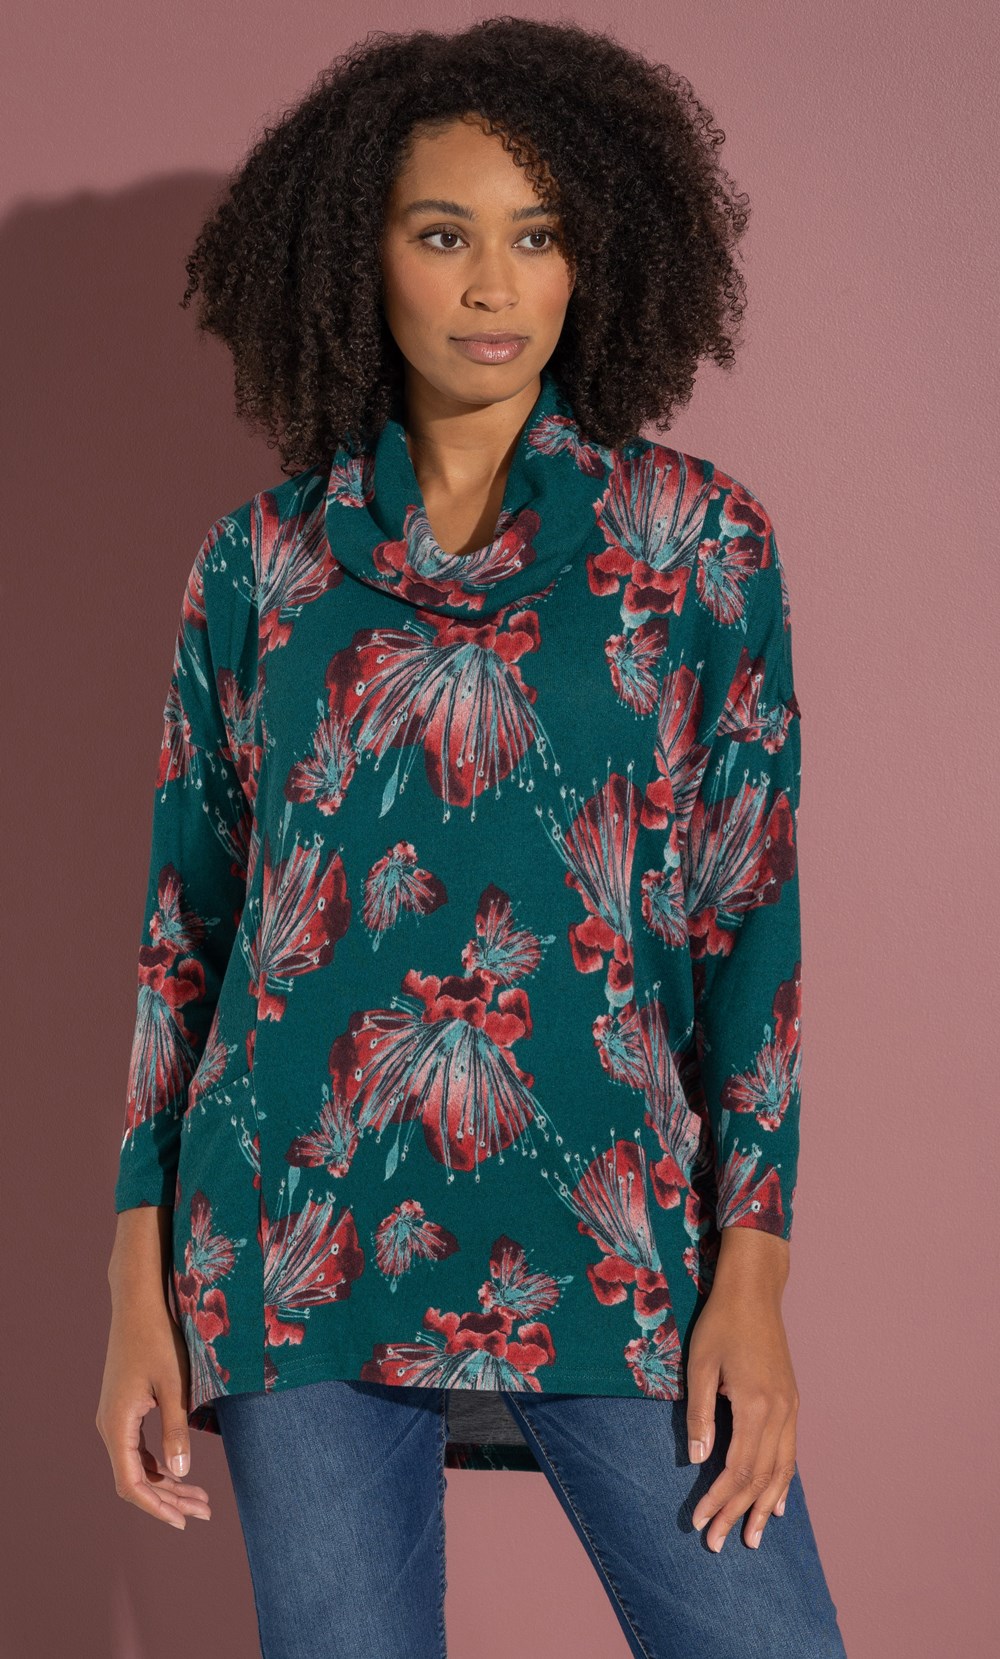 Brands - Klass Floral Print Oversized Brushed  Knitted Tunic Top Green/Red Women’s